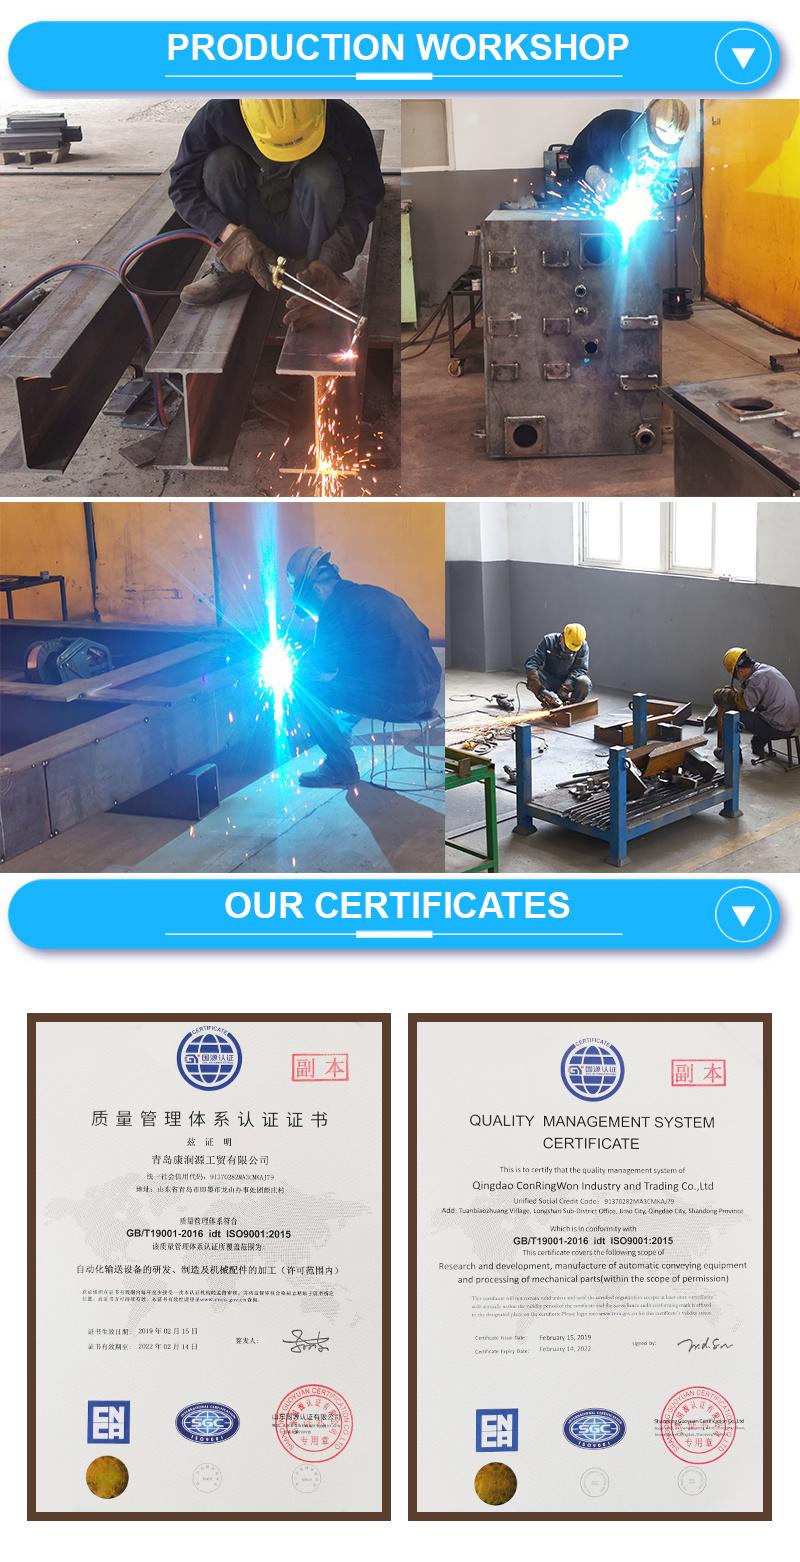 OEM Customized Design Heavy Duty Colorful Powder Machinery Accessories